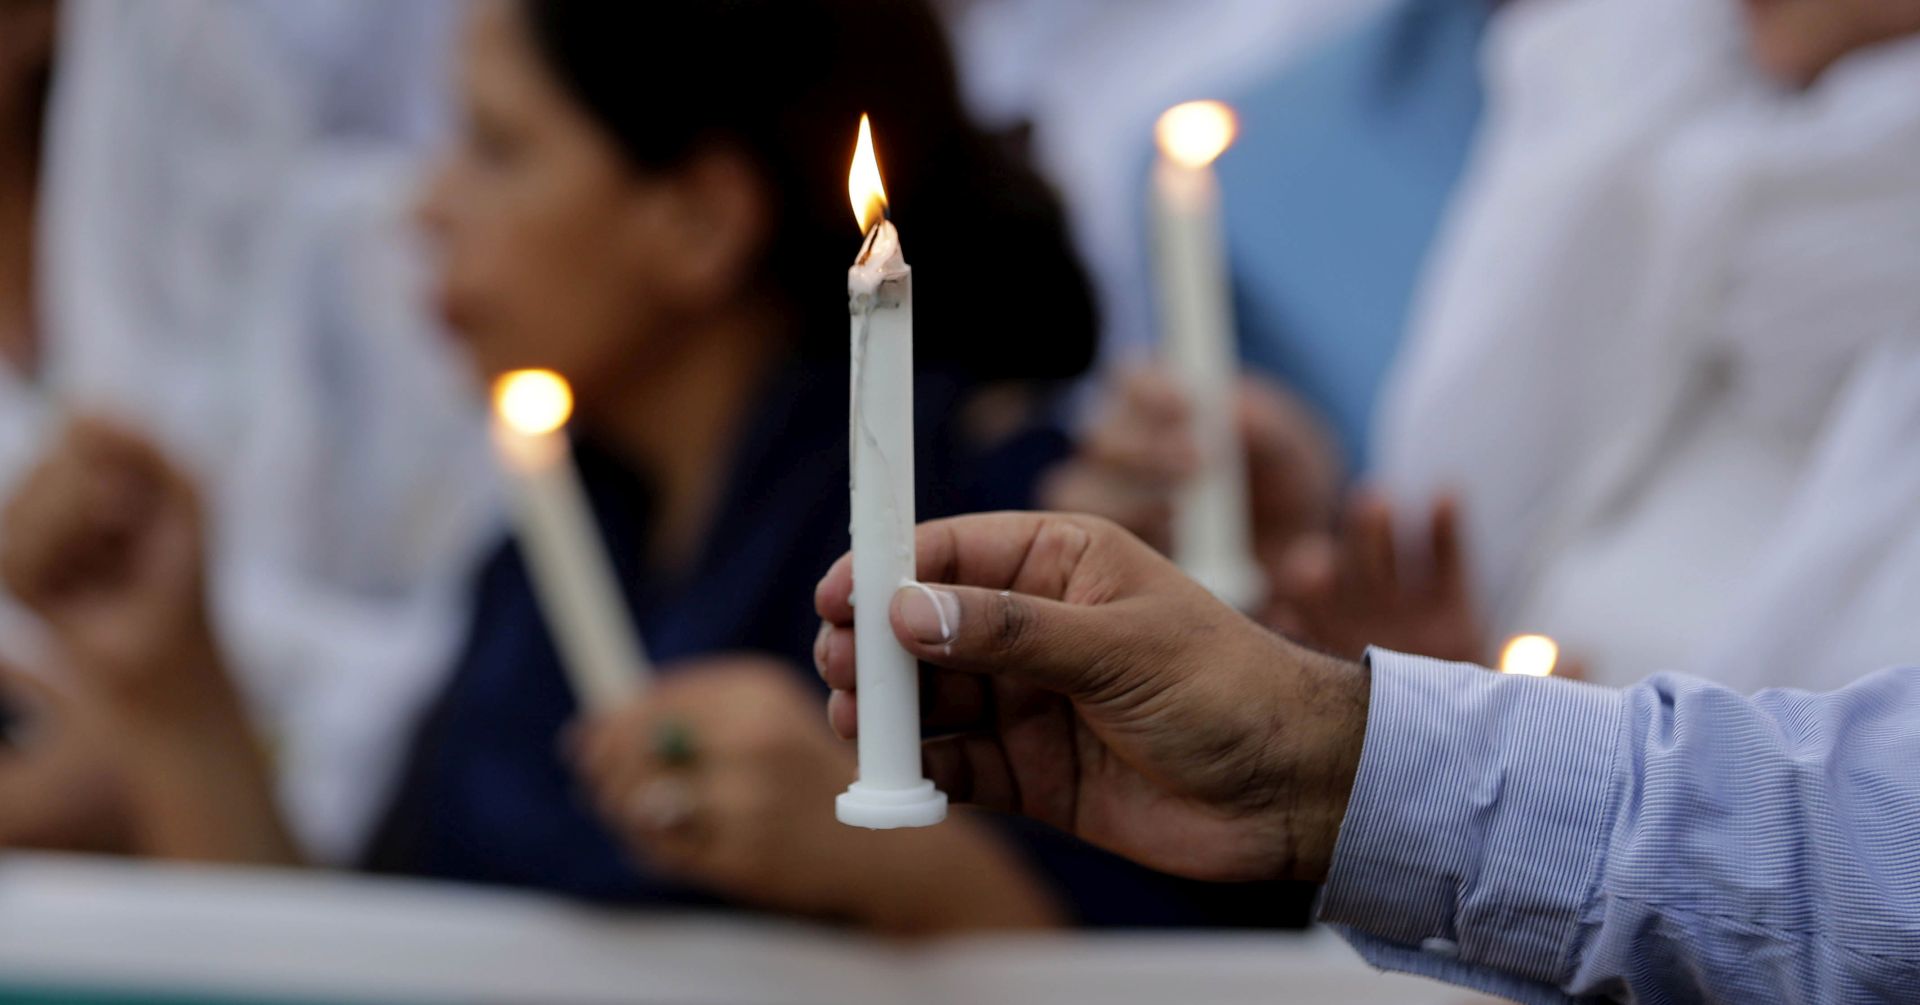 epa07521500 Pakistani activists of civil society light candles to commemorate the victims of the Sri Lanka bombings  in Lahore, Pakistan, 22 April 2019. According to police at least 290 people were killed and more than 400 injured in a coordinated series of blasts during the Easter Sunday service at churches and hotels in Sri Lanka on 21 April 2019.  EPA/RAHAT DAR